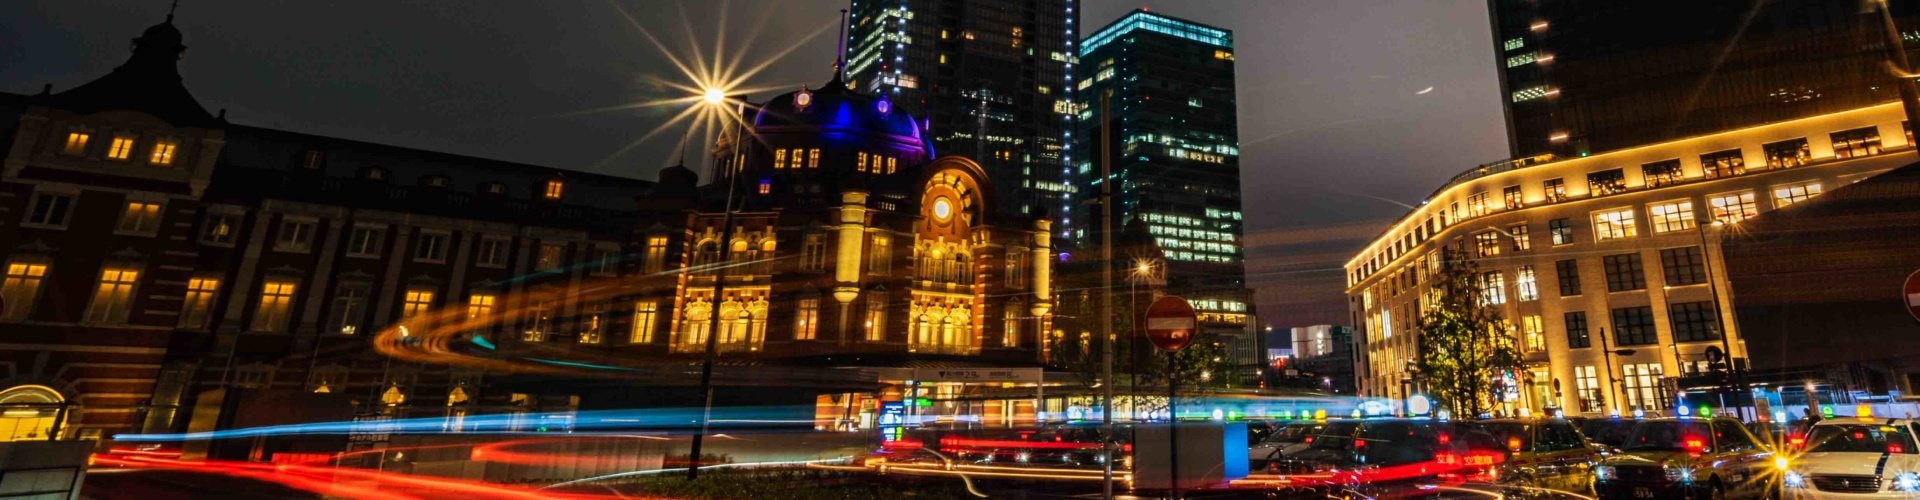 Focal Point: 10 Pictures of Tokyo Station